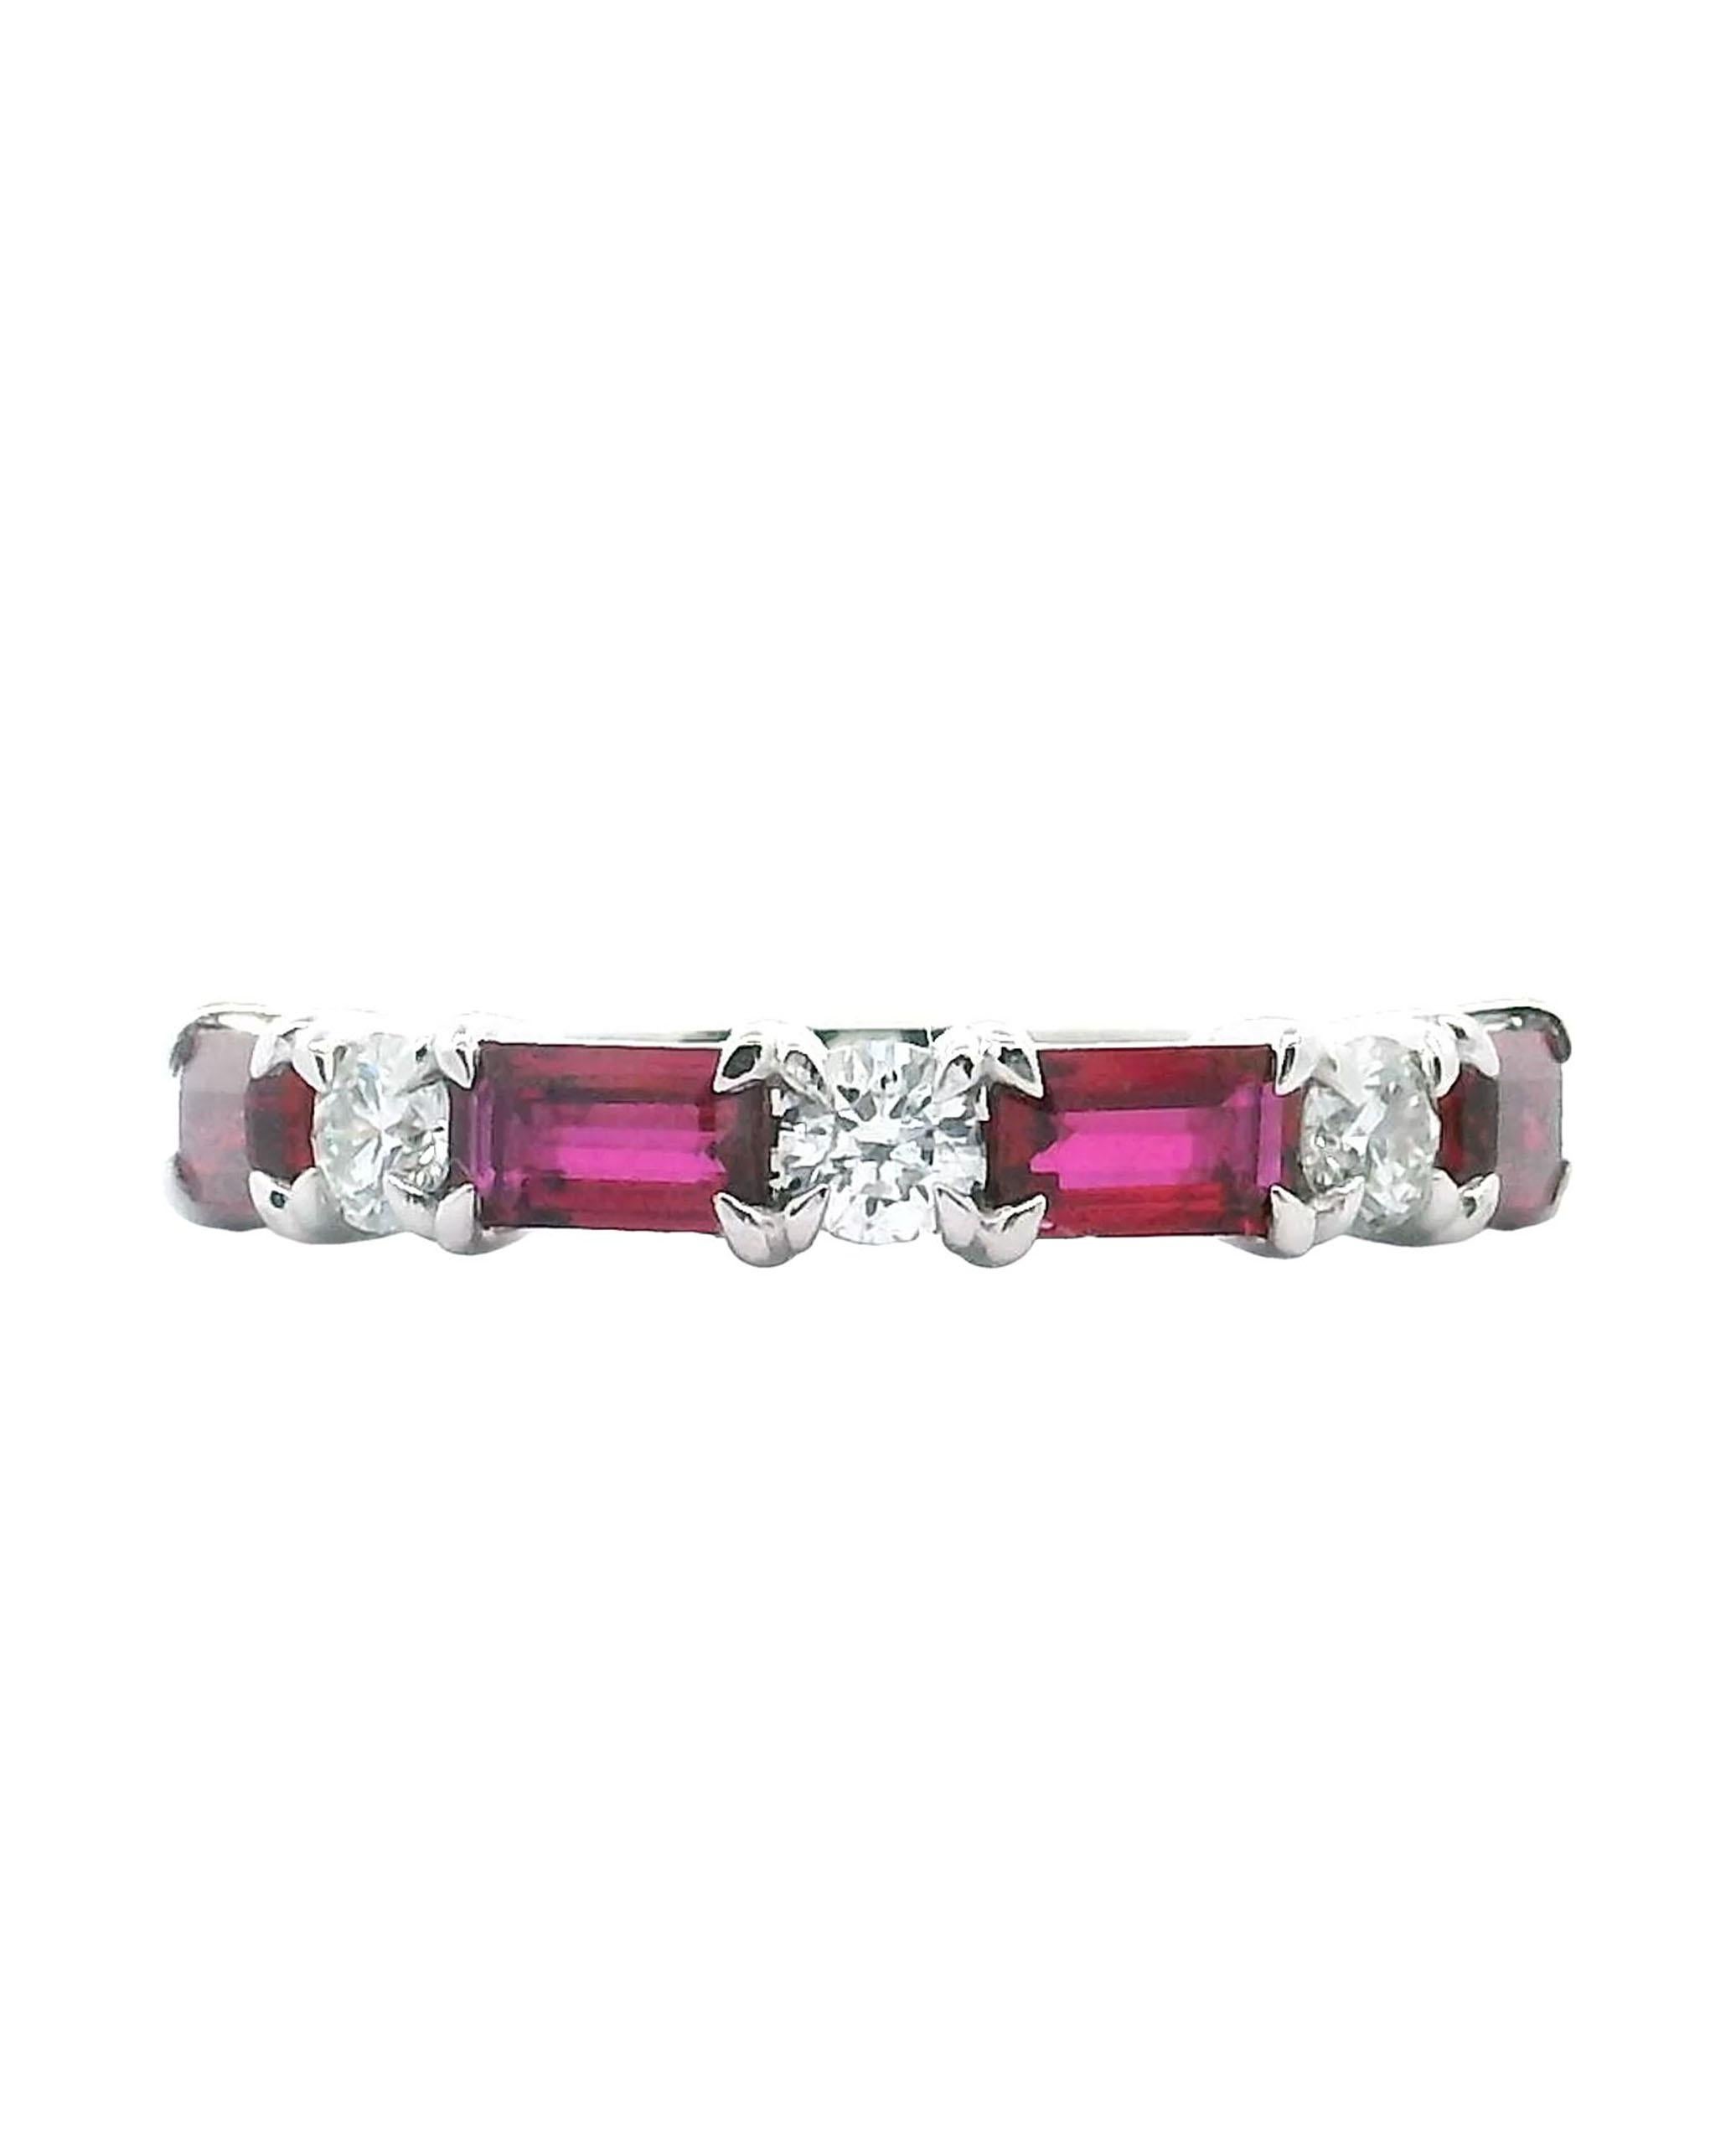 18K white gold ring with 4 emerald-cut rubies weighing 1.09 carats total and 3 round brilliant-cut diamonds weighing 0.34 carats total. (F/G color, VS2/SI1 clarity)

* Finger size 6.5
* Diamonds are G/H color, SI1 clarity.